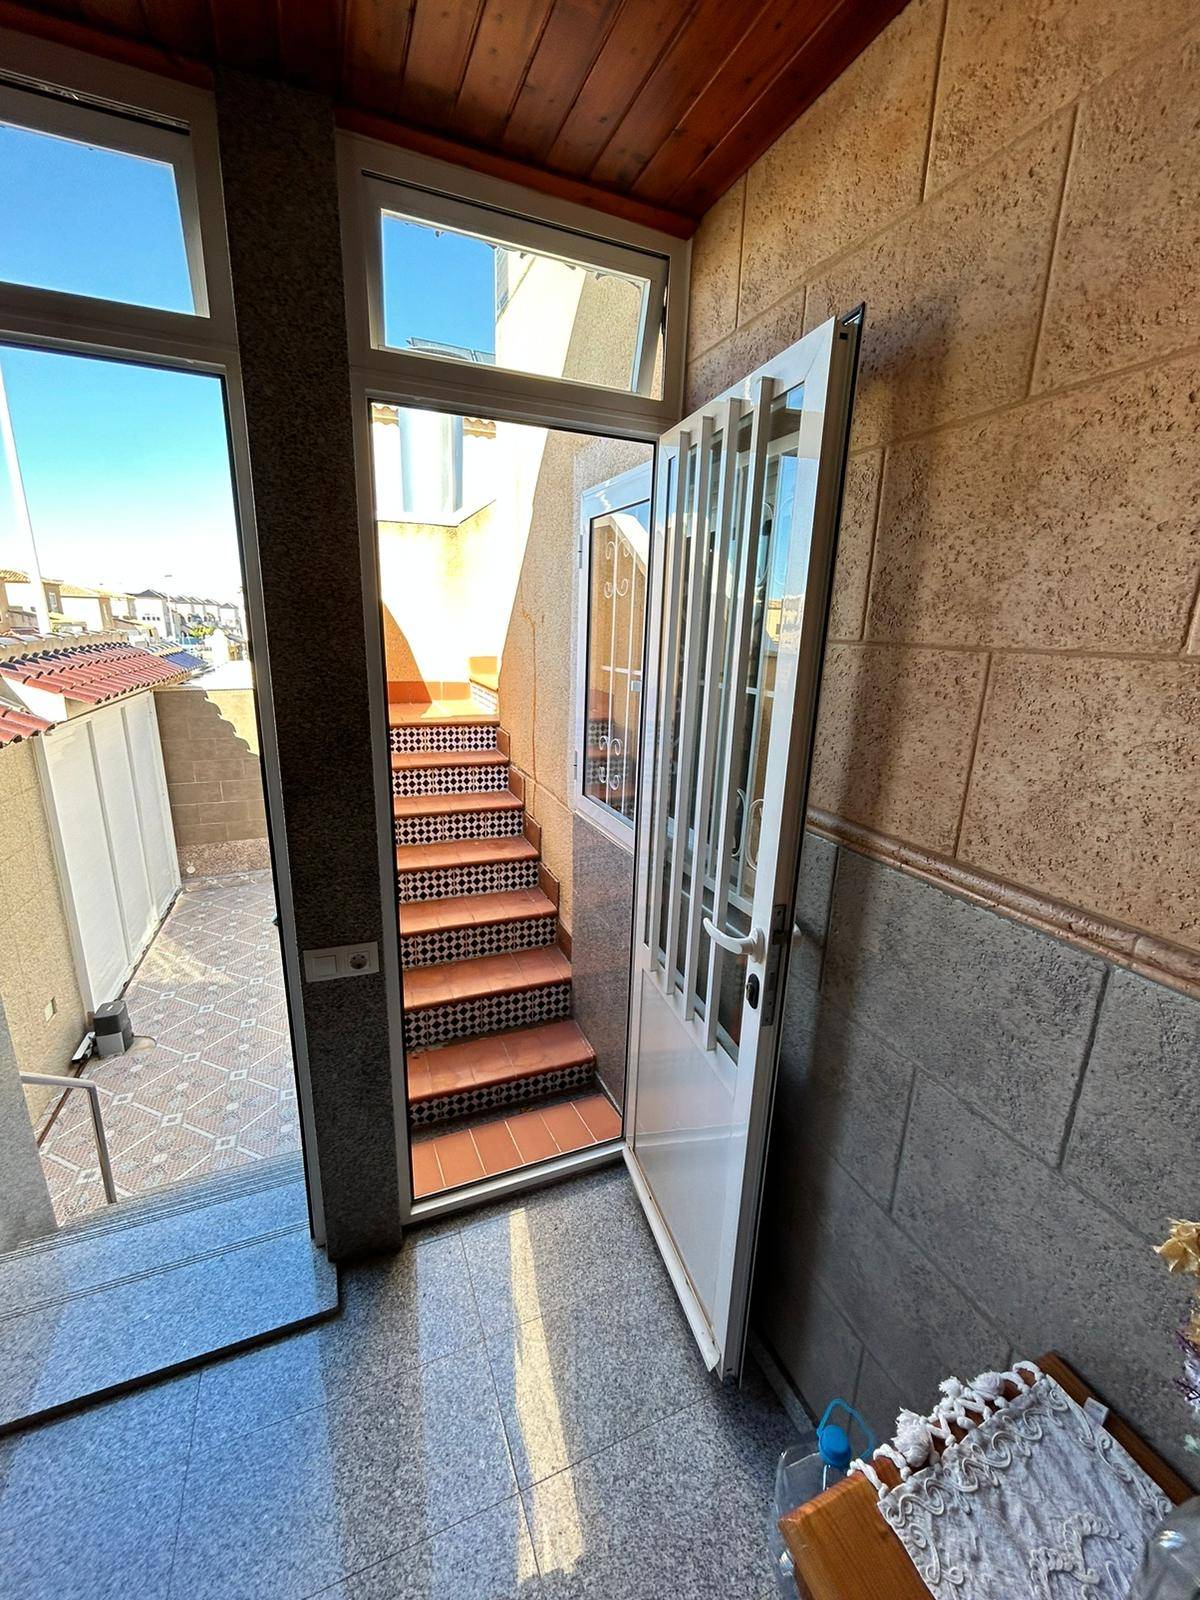 SEMI-DETACHED HOUSE IN THE CENTER OF TORREVIEJA WITH ENTRANCE FOR CAR